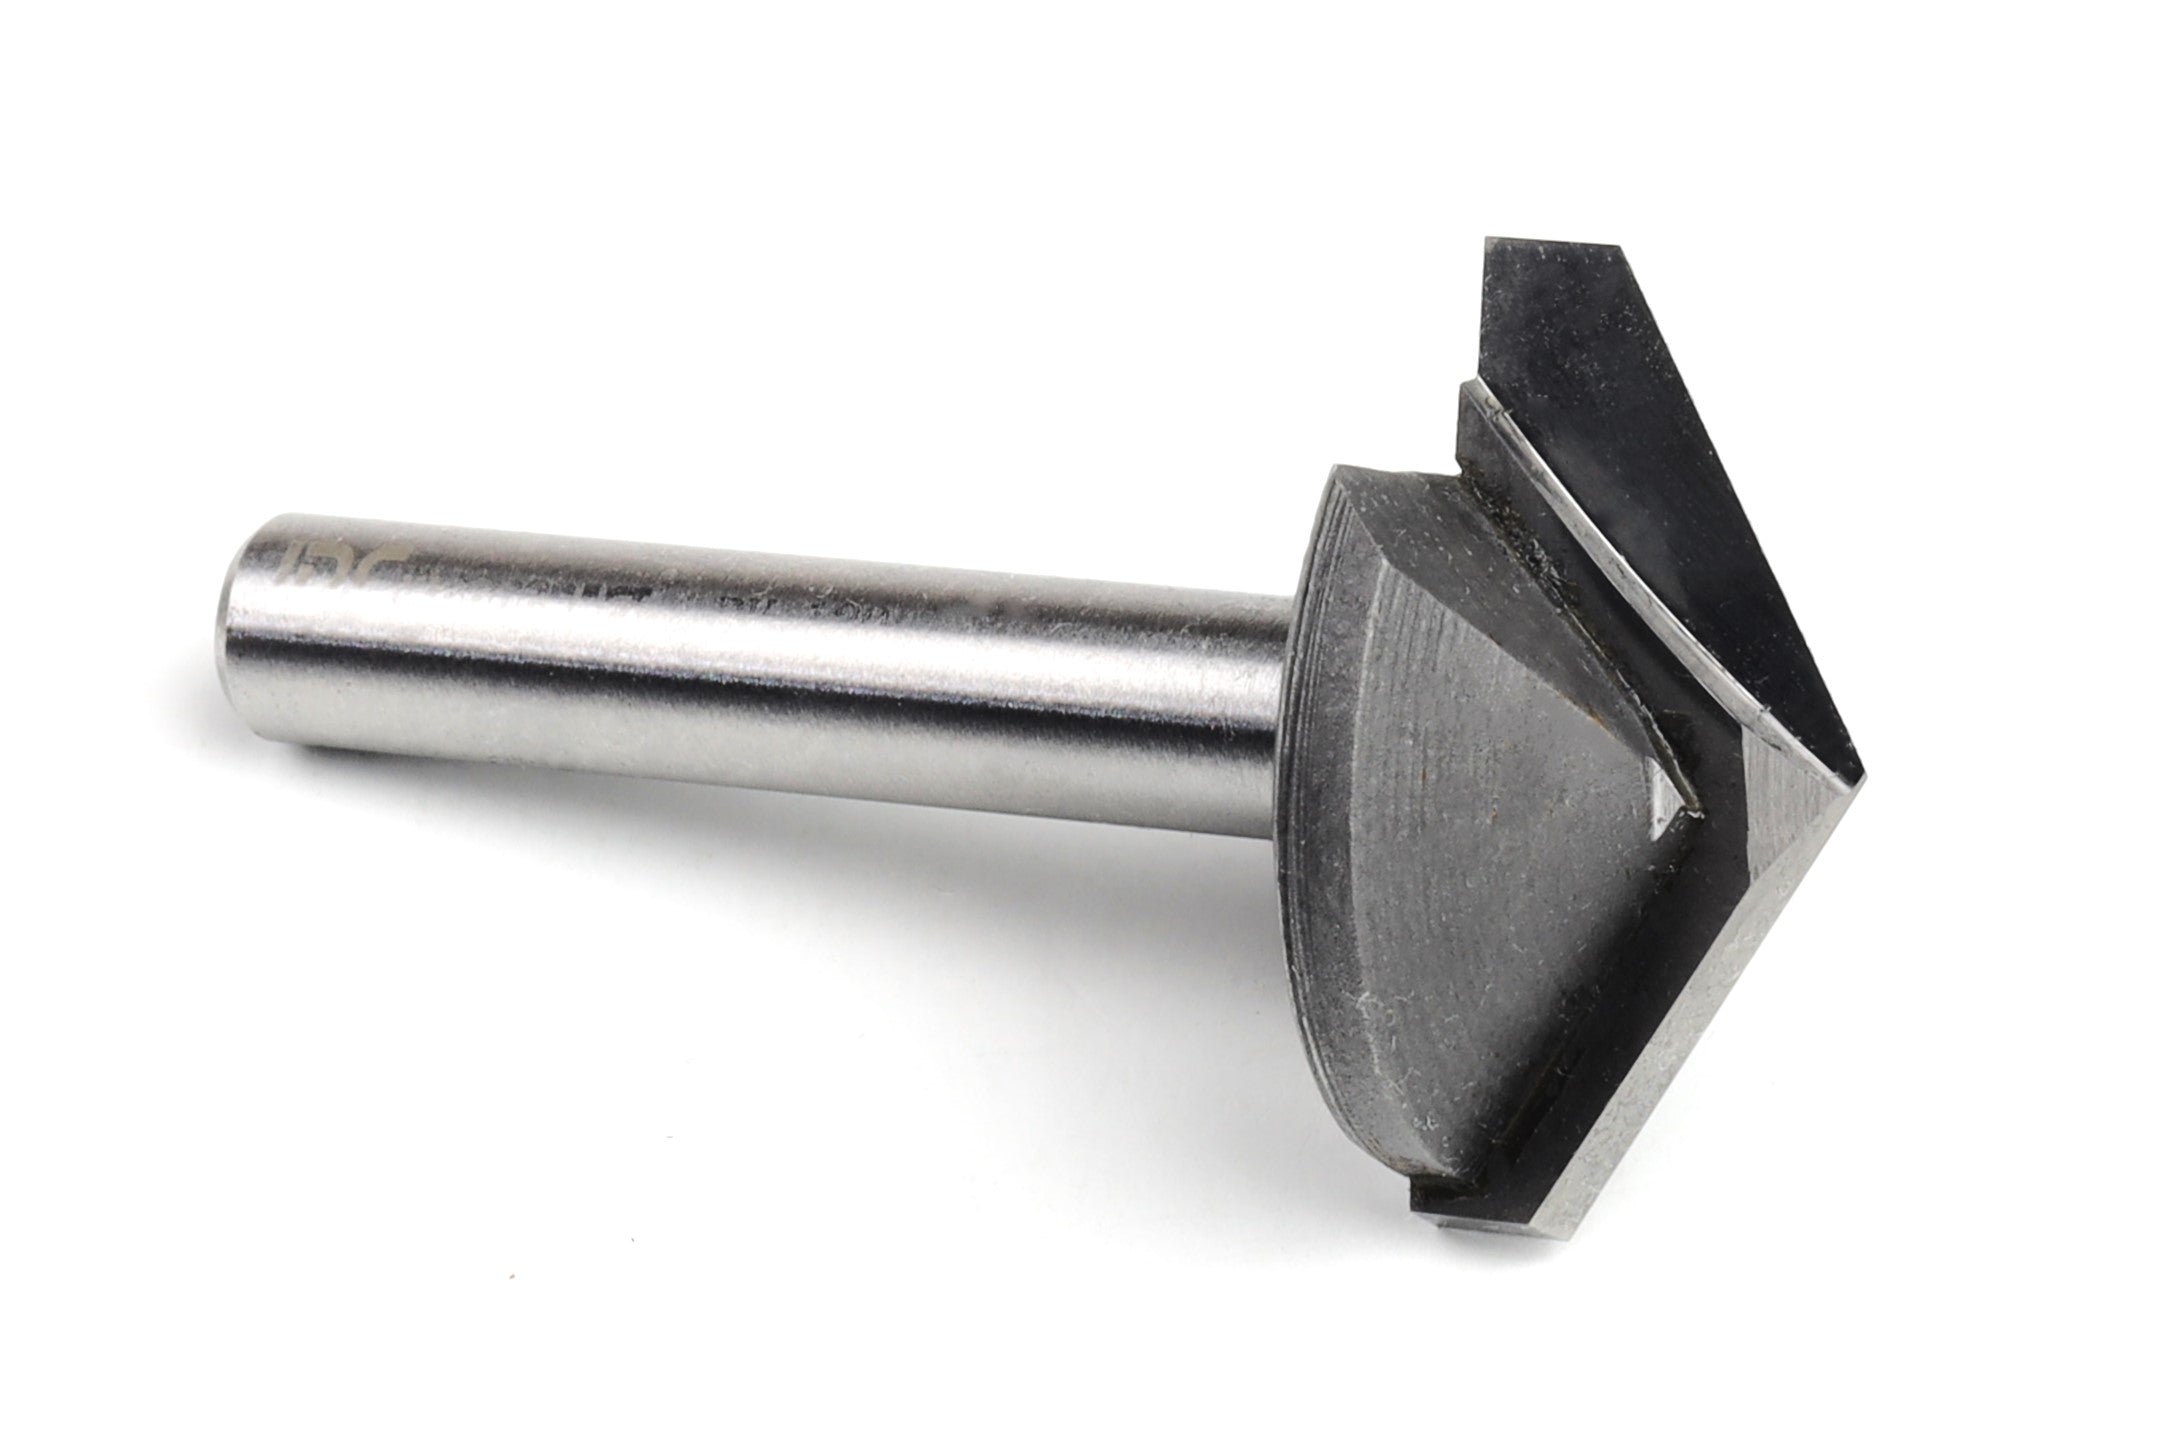 120 Degree Wide-Cutting V Bit 1/4" Shank for CNC Routers